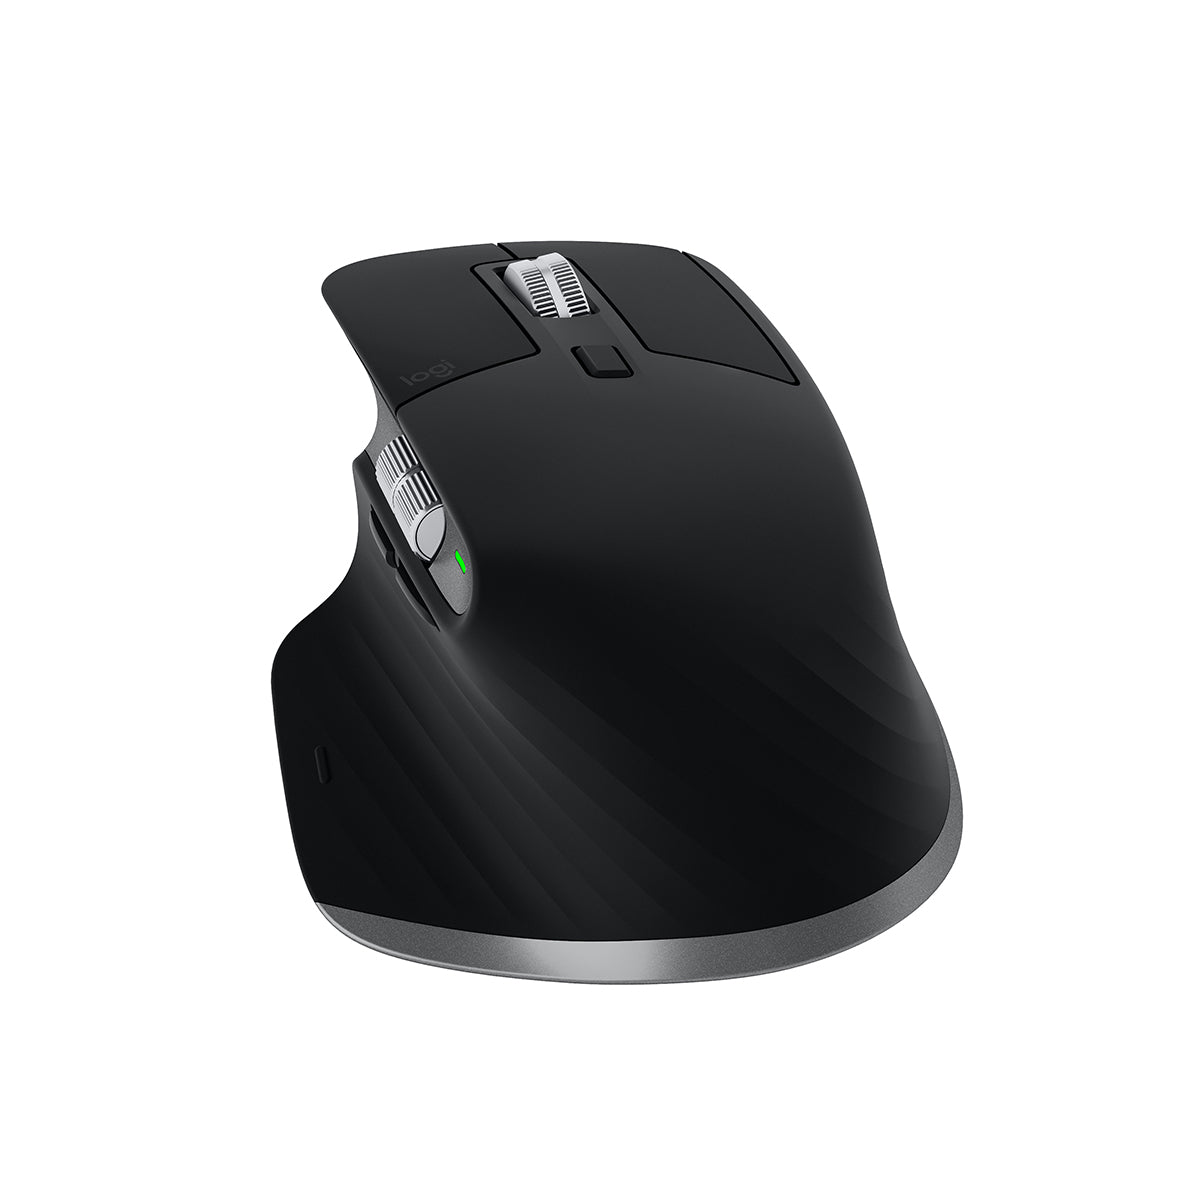 MX MASTER 3S for MAC Performance Wireless Mouse